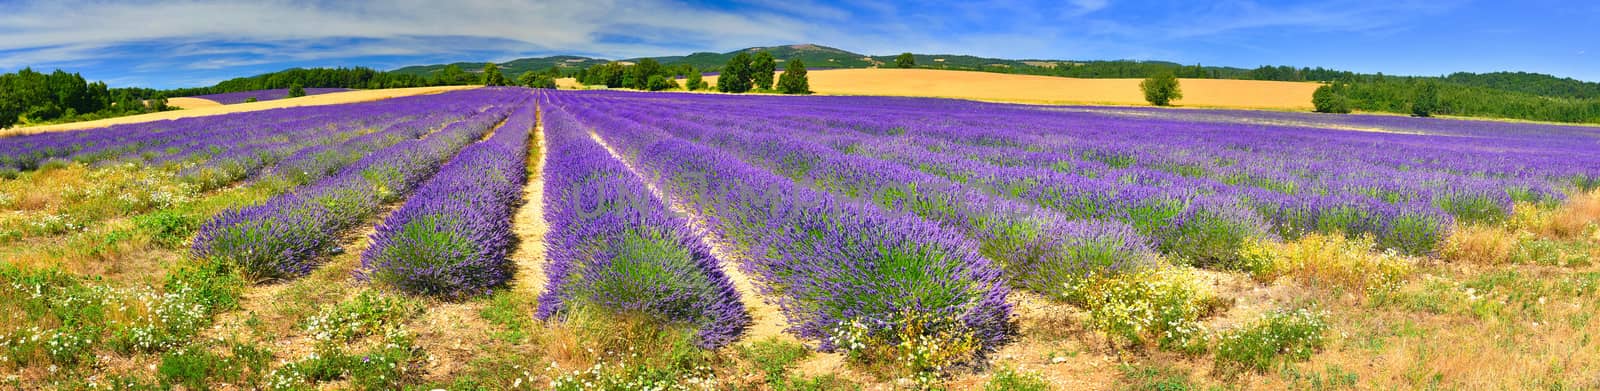 Panorama of lavender field